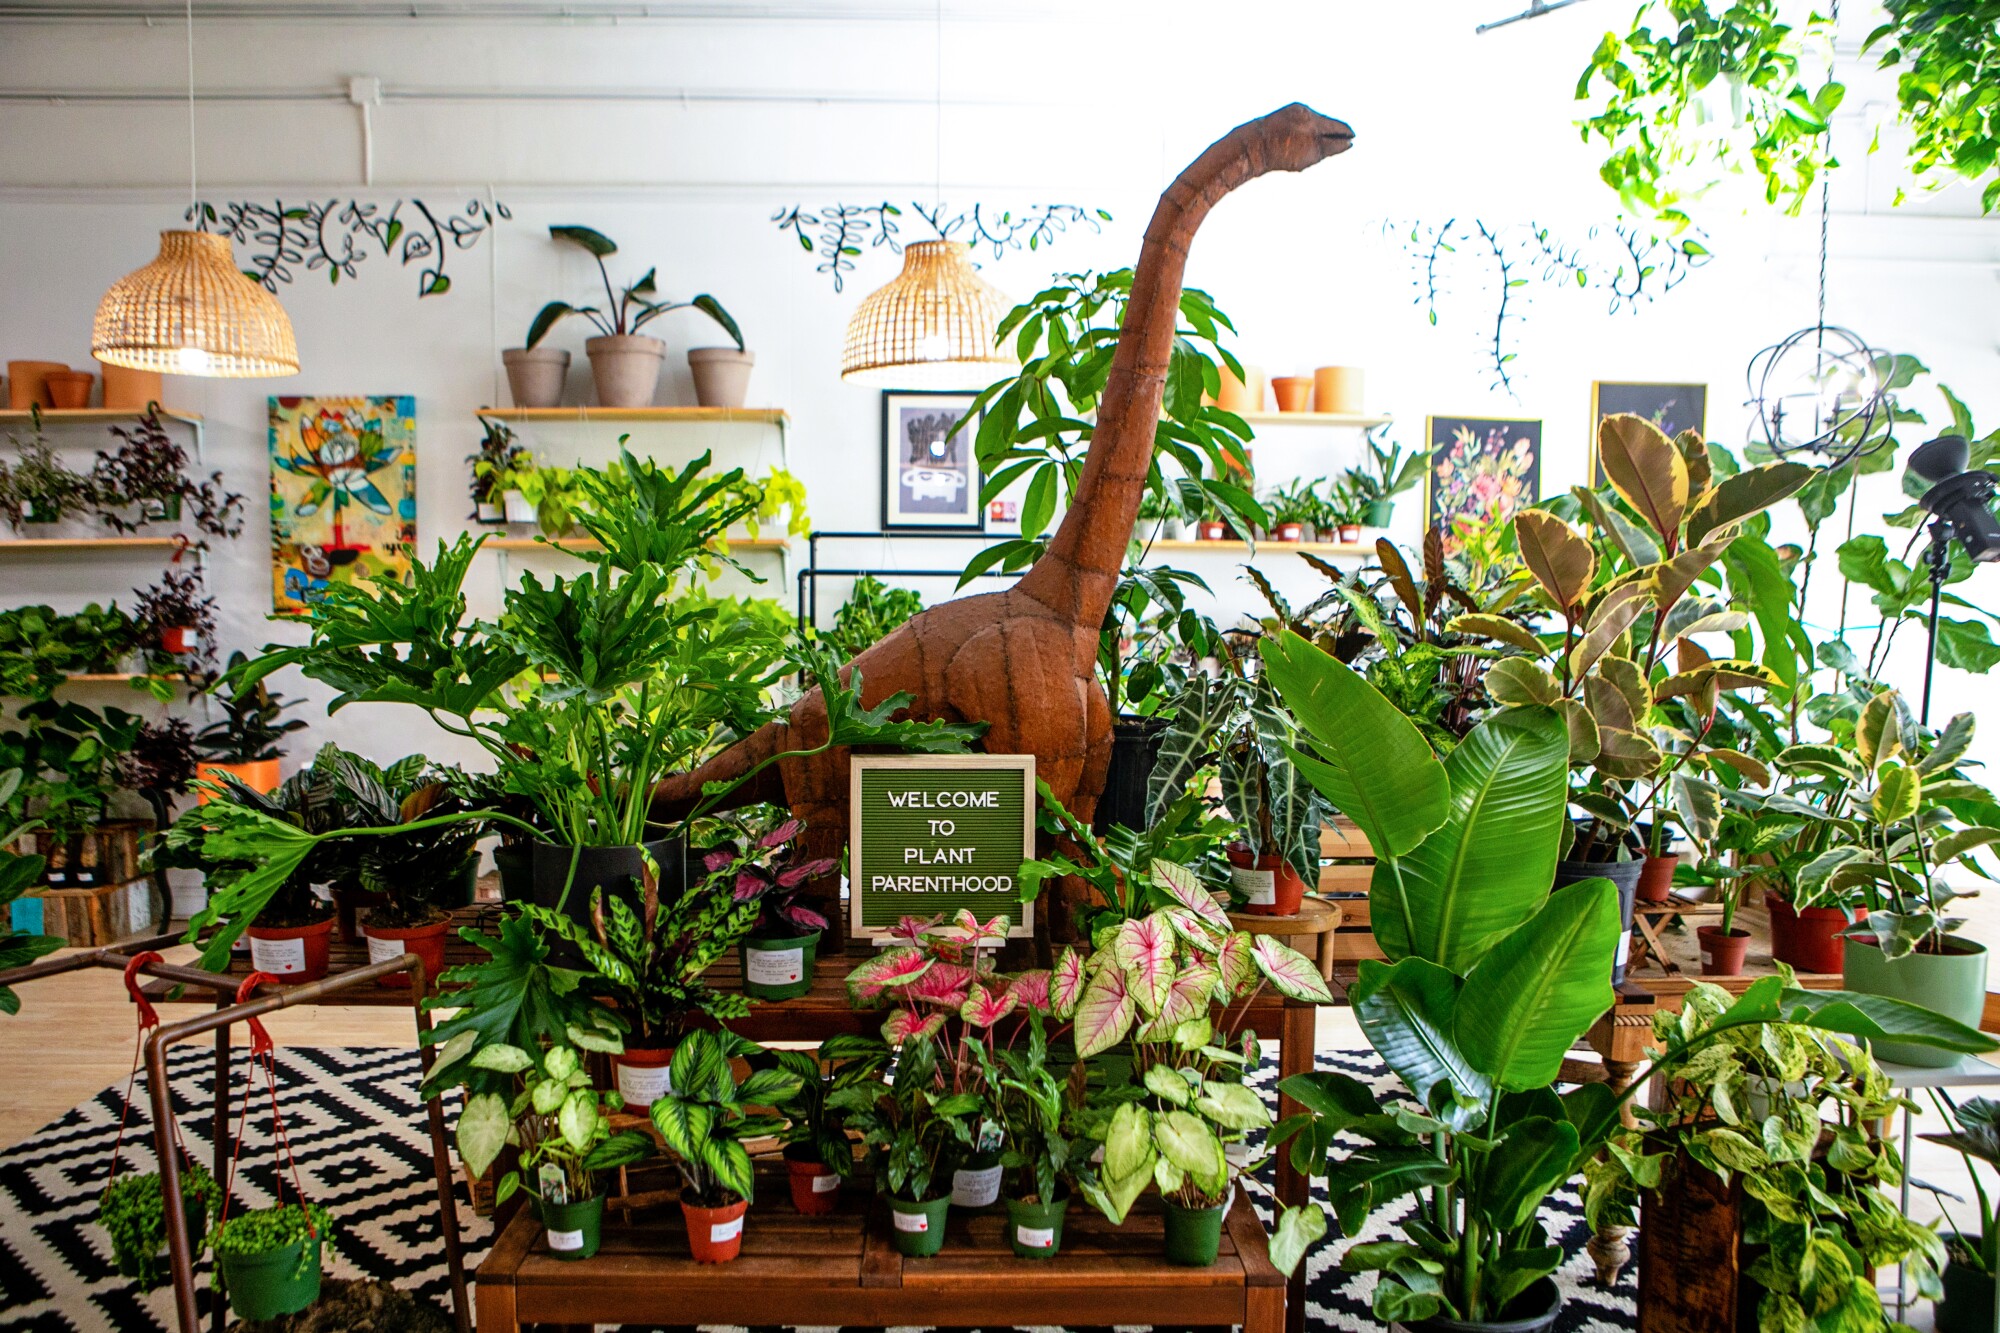 A Brachiosaurus sculpture towers over a group of potted plants indoors.